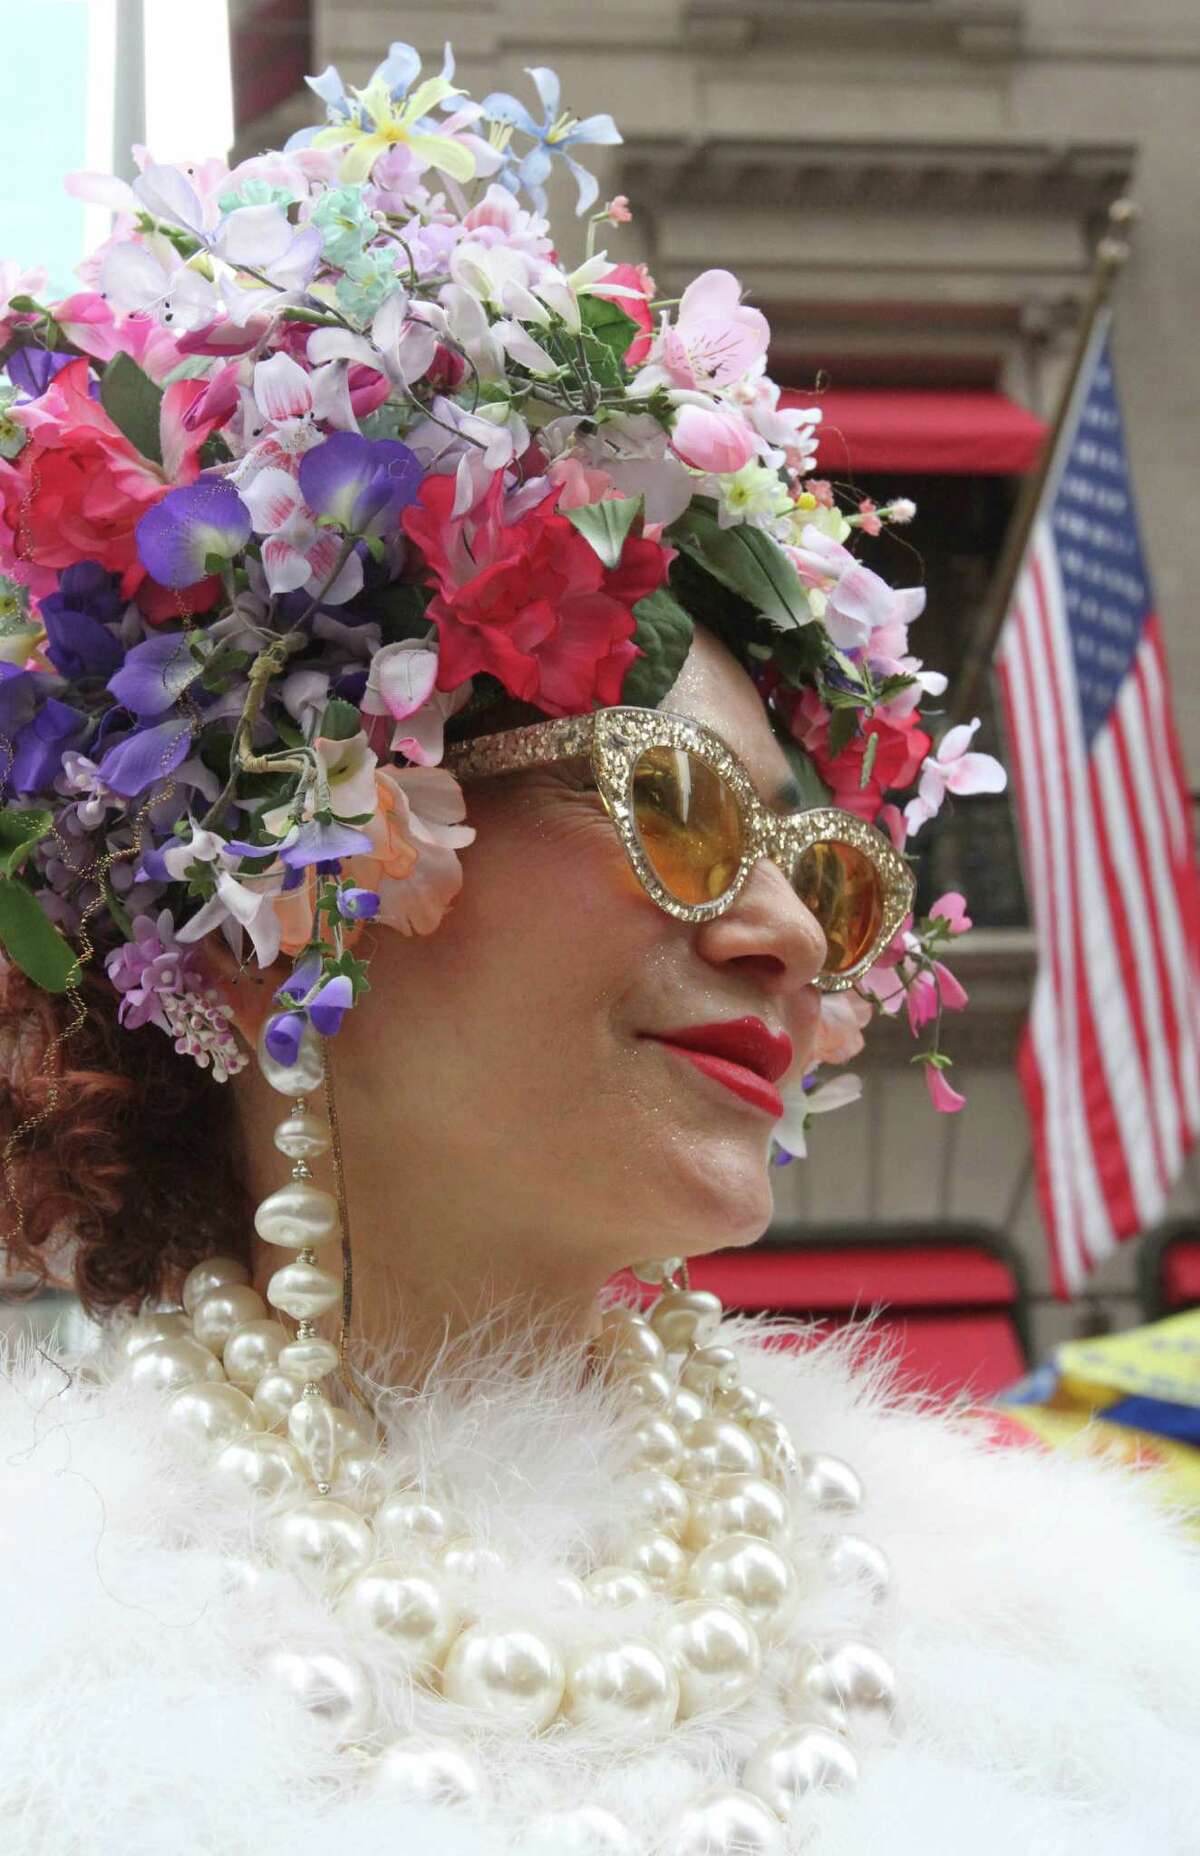 Dressed for the occasion, Purely Patricia Fox, of New York, poses for photographs on New York's Fifth Avenue as she takes part in the Easter Parade, Sunday, March 31, 2013.